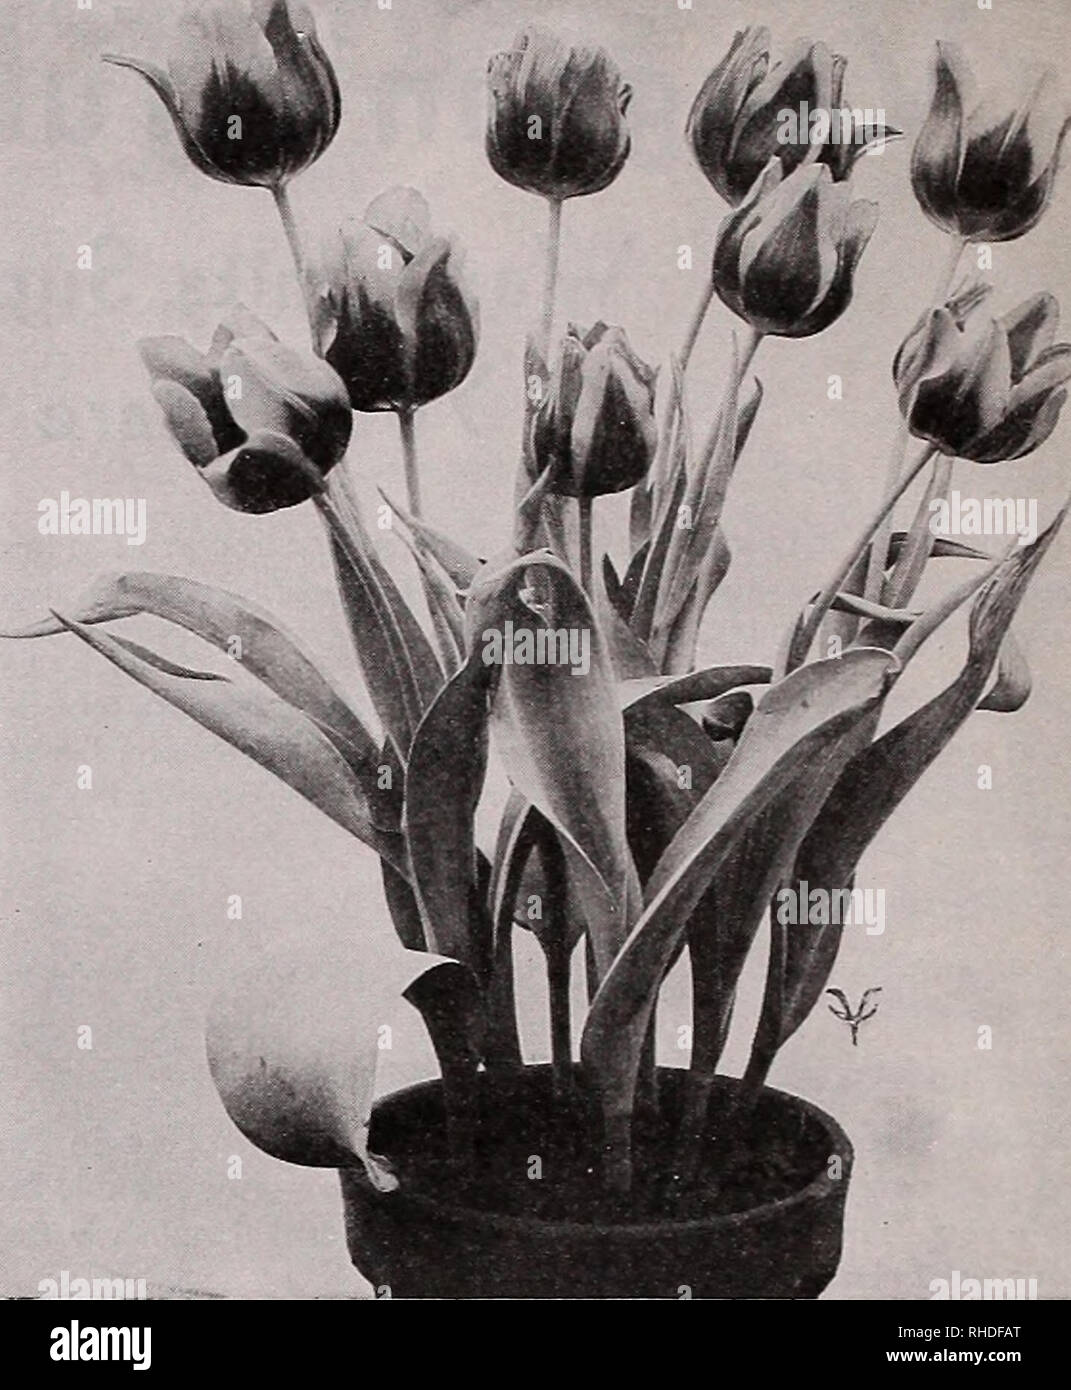 . Book for florists : autumn 1940. Flowers Seeds Catalogs; Bulbs (Plants) Seedlings Catalogs; Vegetables Seeds Catalogs; Trees Seeds Catalogs; Horticulture Equipment and supplies Catalogs. TULIP DIDO, PINK COTTAGE Cottage Tuli FIRSTS Per Per 100 1000 Carrara, pure white $7.00 $65.00 Dido, pink salmon, edged orange .... 6.50 60.00 Gesneriana Lutea, (f) golden yellow, sweet-scented. A splendid one under glass, on account of its color and perfume 6.00 55.00 Inglescombe Pink, (f) salmon rose.. 6.00 55.00 Inglescombe Yellow, (f) rich yellow. 5.50 50.00 John Ruskin, salmon-rose with pale yellow marg Stock Photo